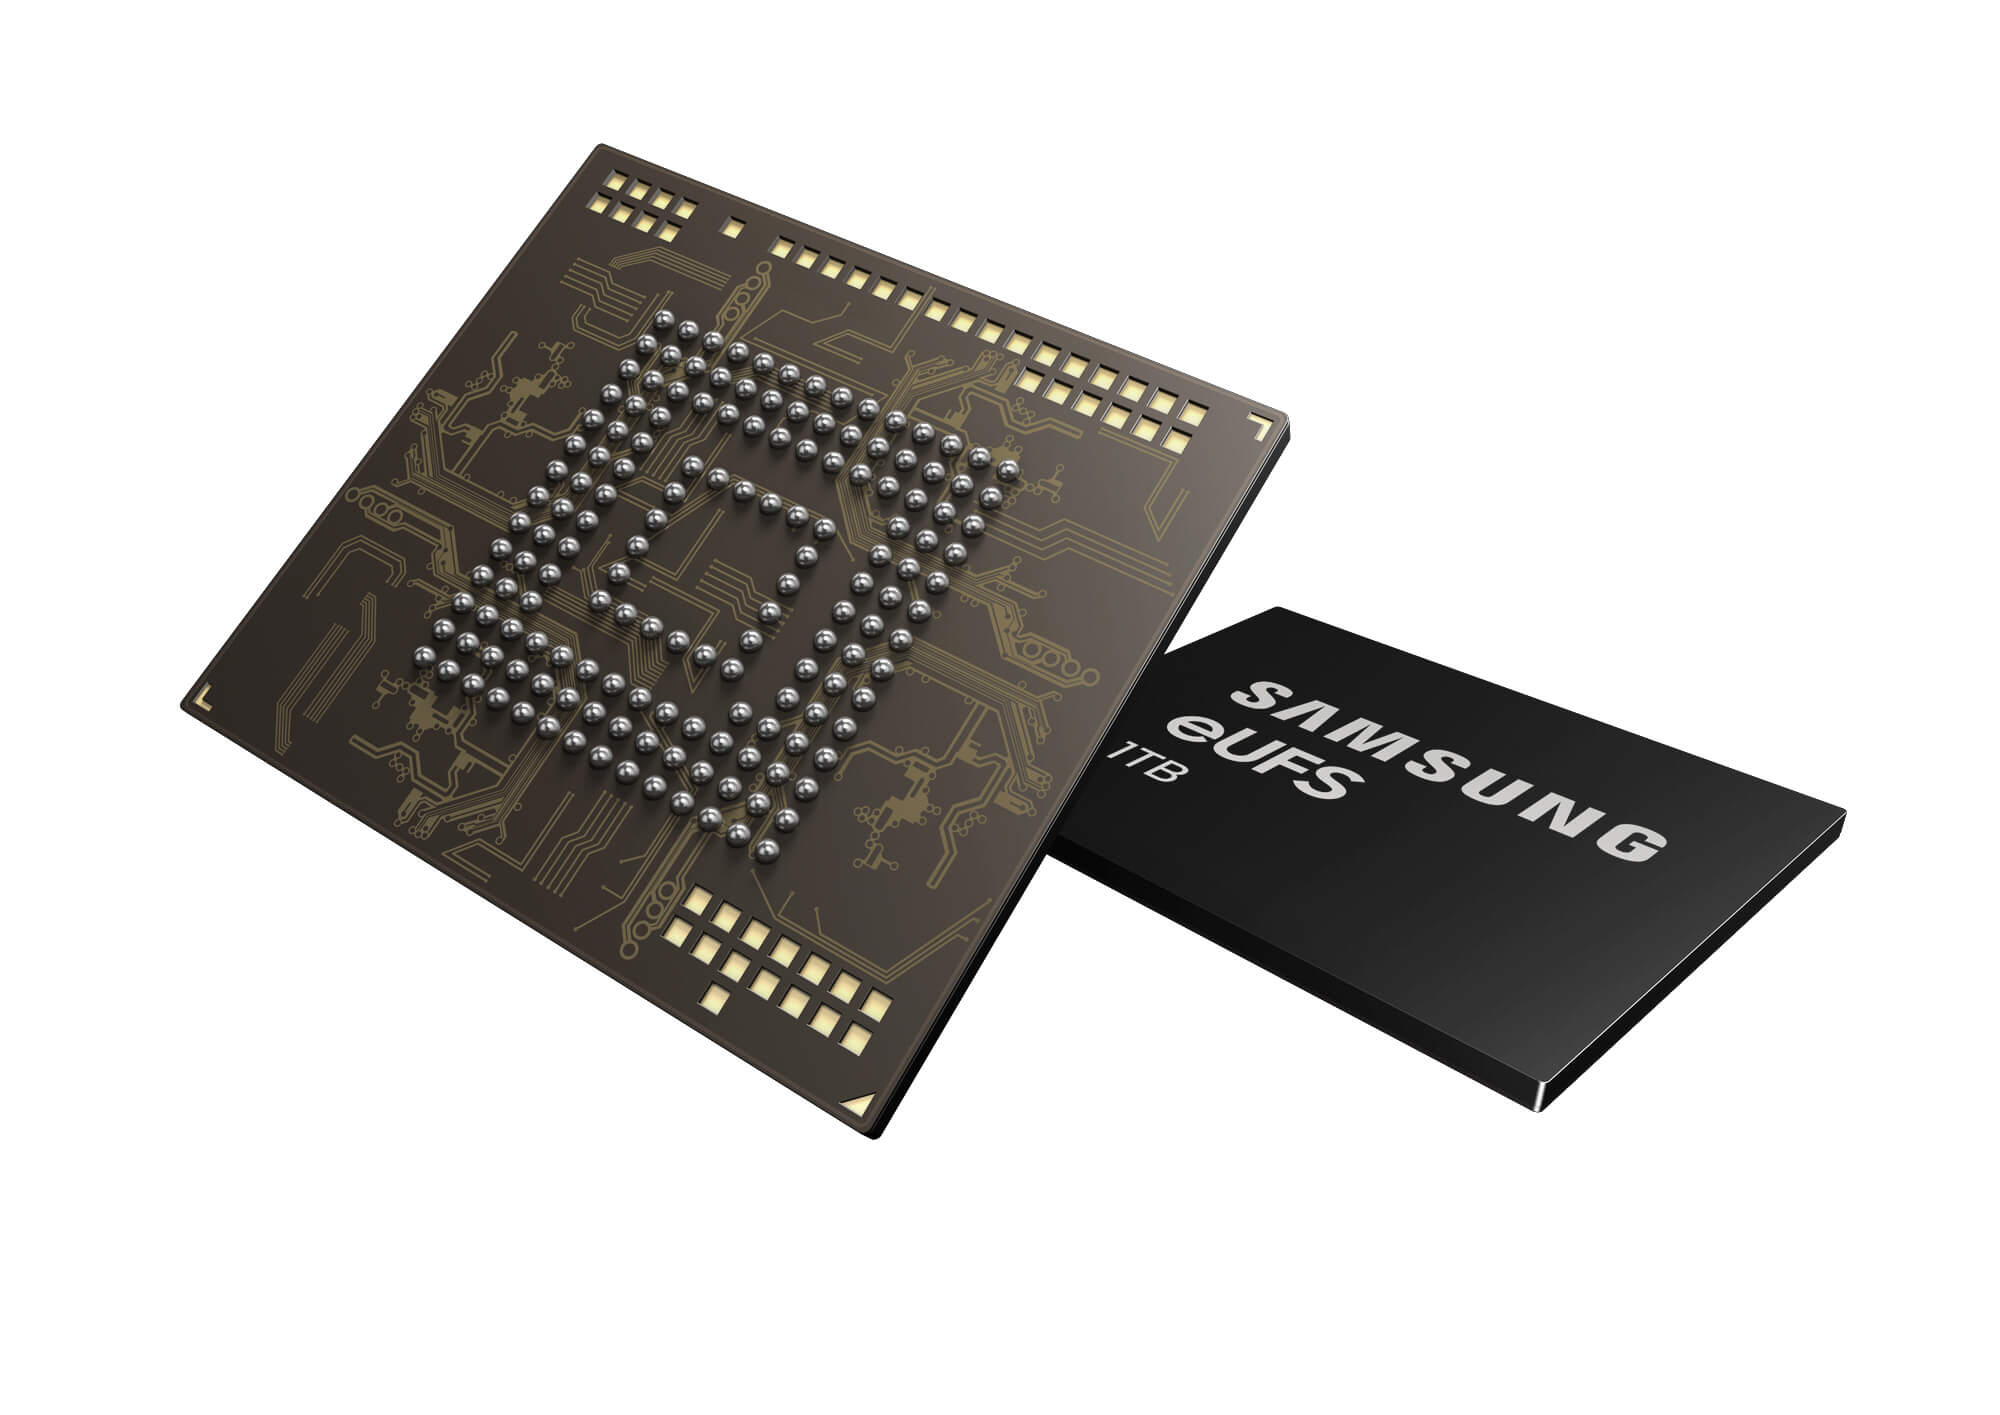 Samsung debuts 1TB flash storage chips for mobile devices